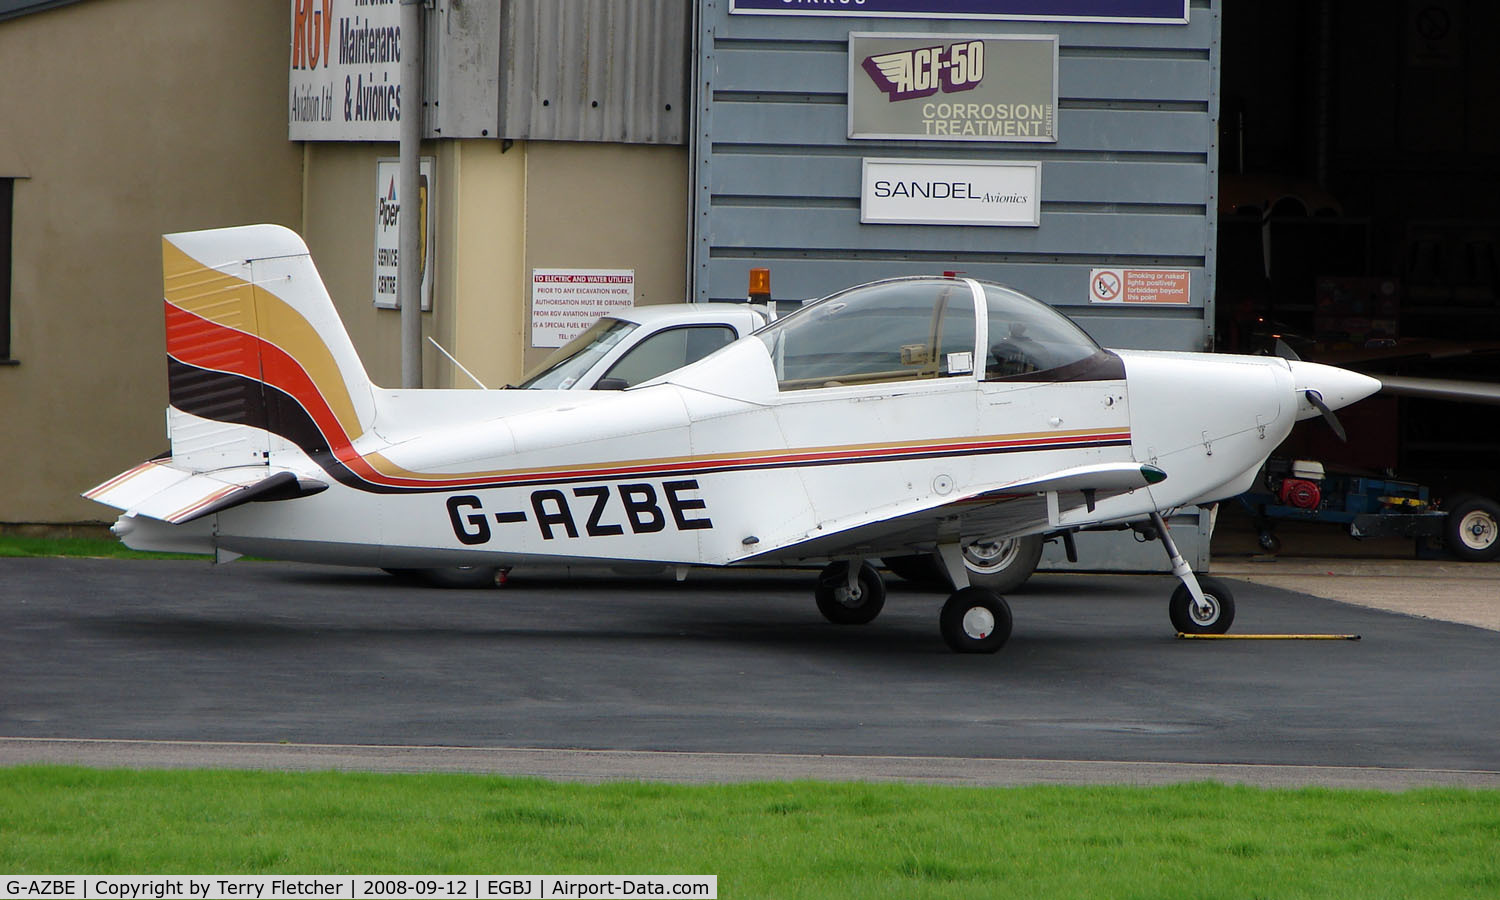 G-AZBE, 1971 AESL Glos-Airtourer Super 150/T5 C/N A535, AirTourer noted at Gloucestershire Airport  UK in Sept 2008